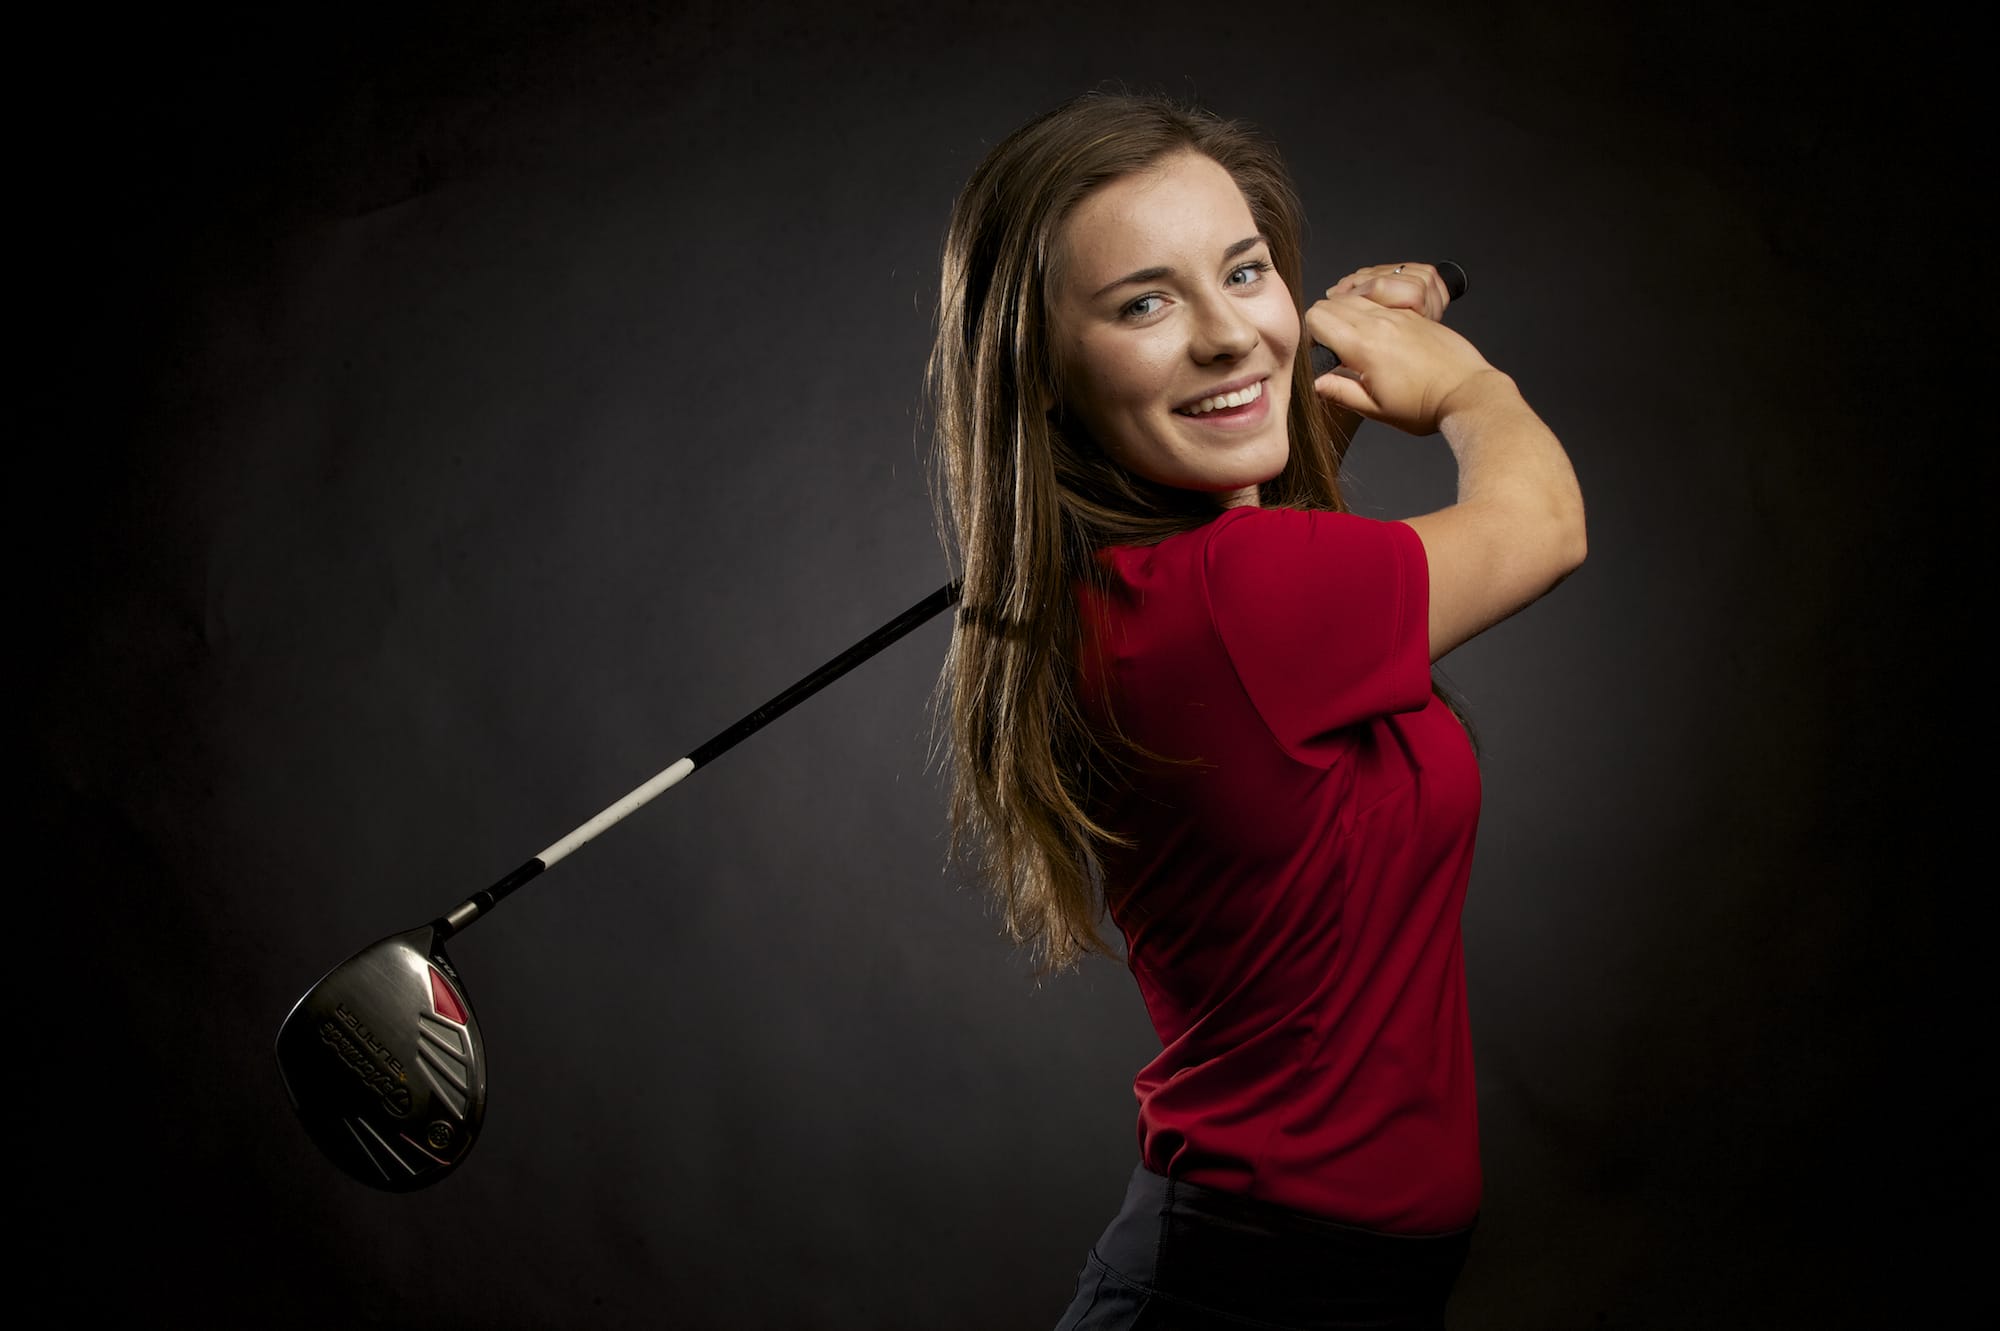 Fort Vancouver sophomore Bridget Standard was the only girl golfer from a Class 3A or 4A Clark County school to medal at state.